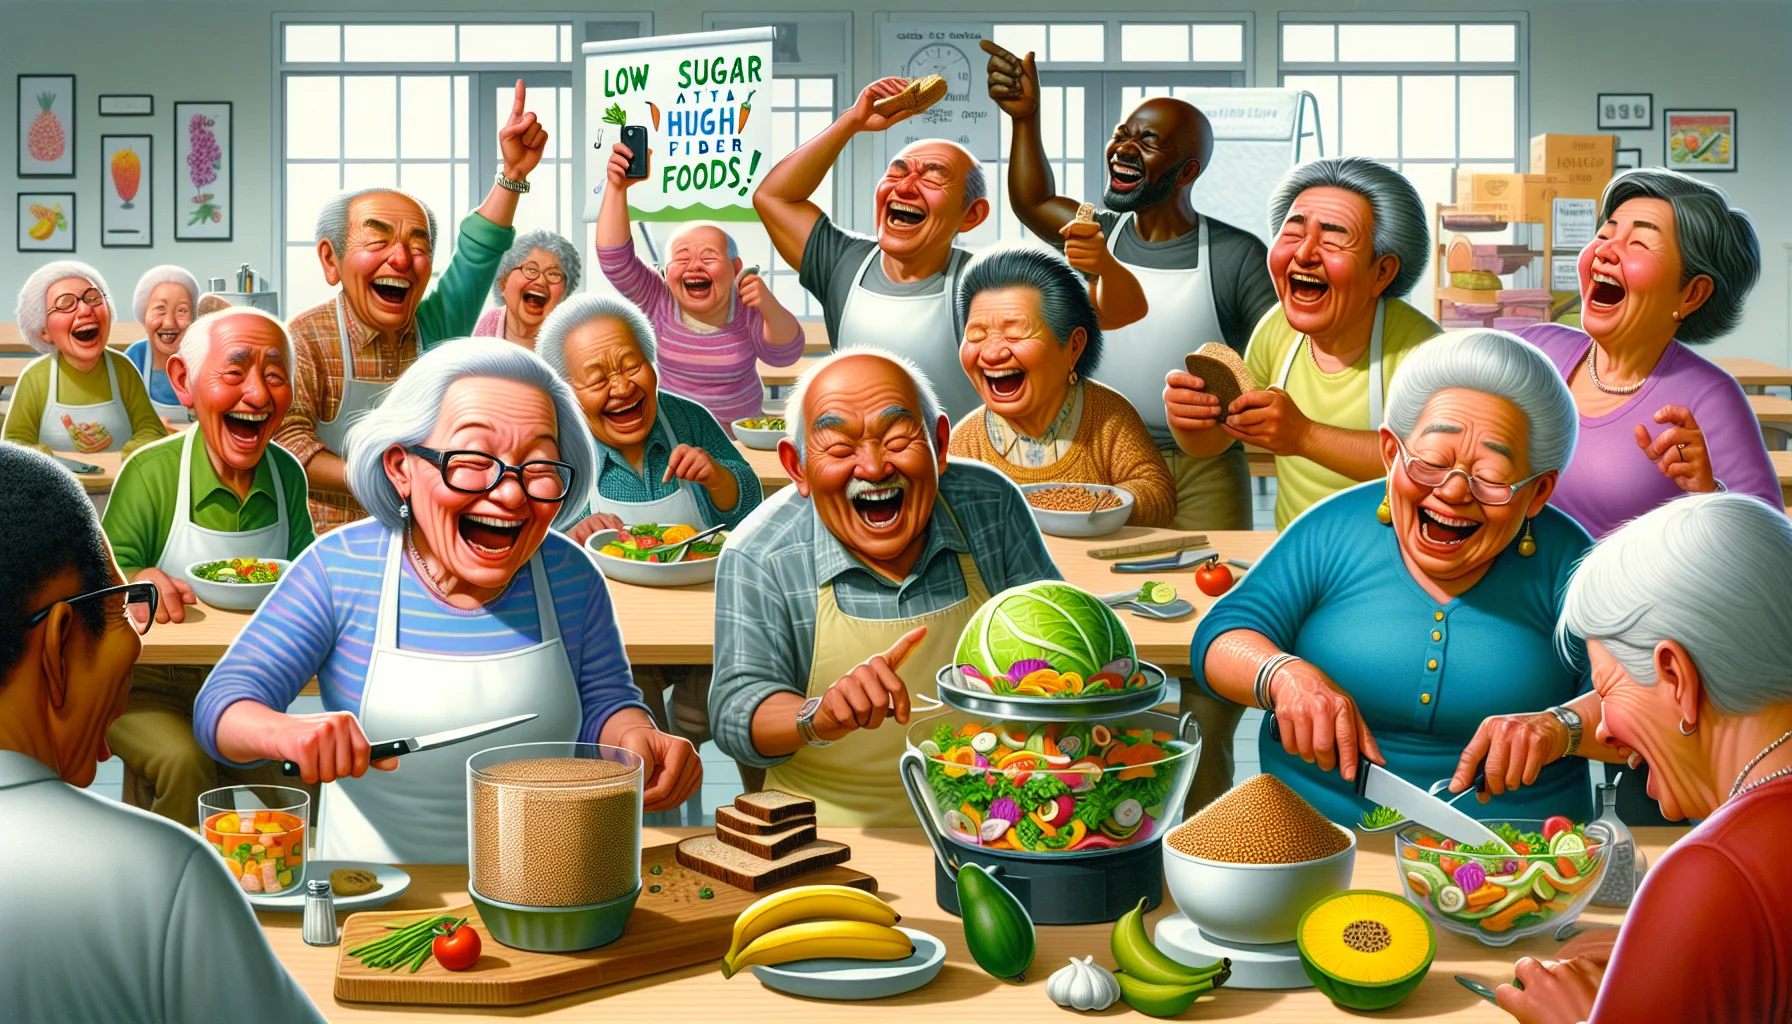 An amusing, realistic illustration of a group of lively elderly individuals in a community center. An elderly South Asian woman leads a culinary class where everyone is laughing and having a good time. They are learning to make low sugar, high fiber foods like a colorful salad full of vegetables, whole grain bread, beans, and fruit. A black man humorously struggles as he tries to chop a stubborn pineapple, while a Hispanic woman tries to balance a tall stack of sliced whole grains on a plate. In the background, a Middle-Eastern man laughs, holding up a banana as if it's a phone. Lastly, a Caucasian woman holds up a 'Healthy Eating' banner with a comic, exaggerated smile.